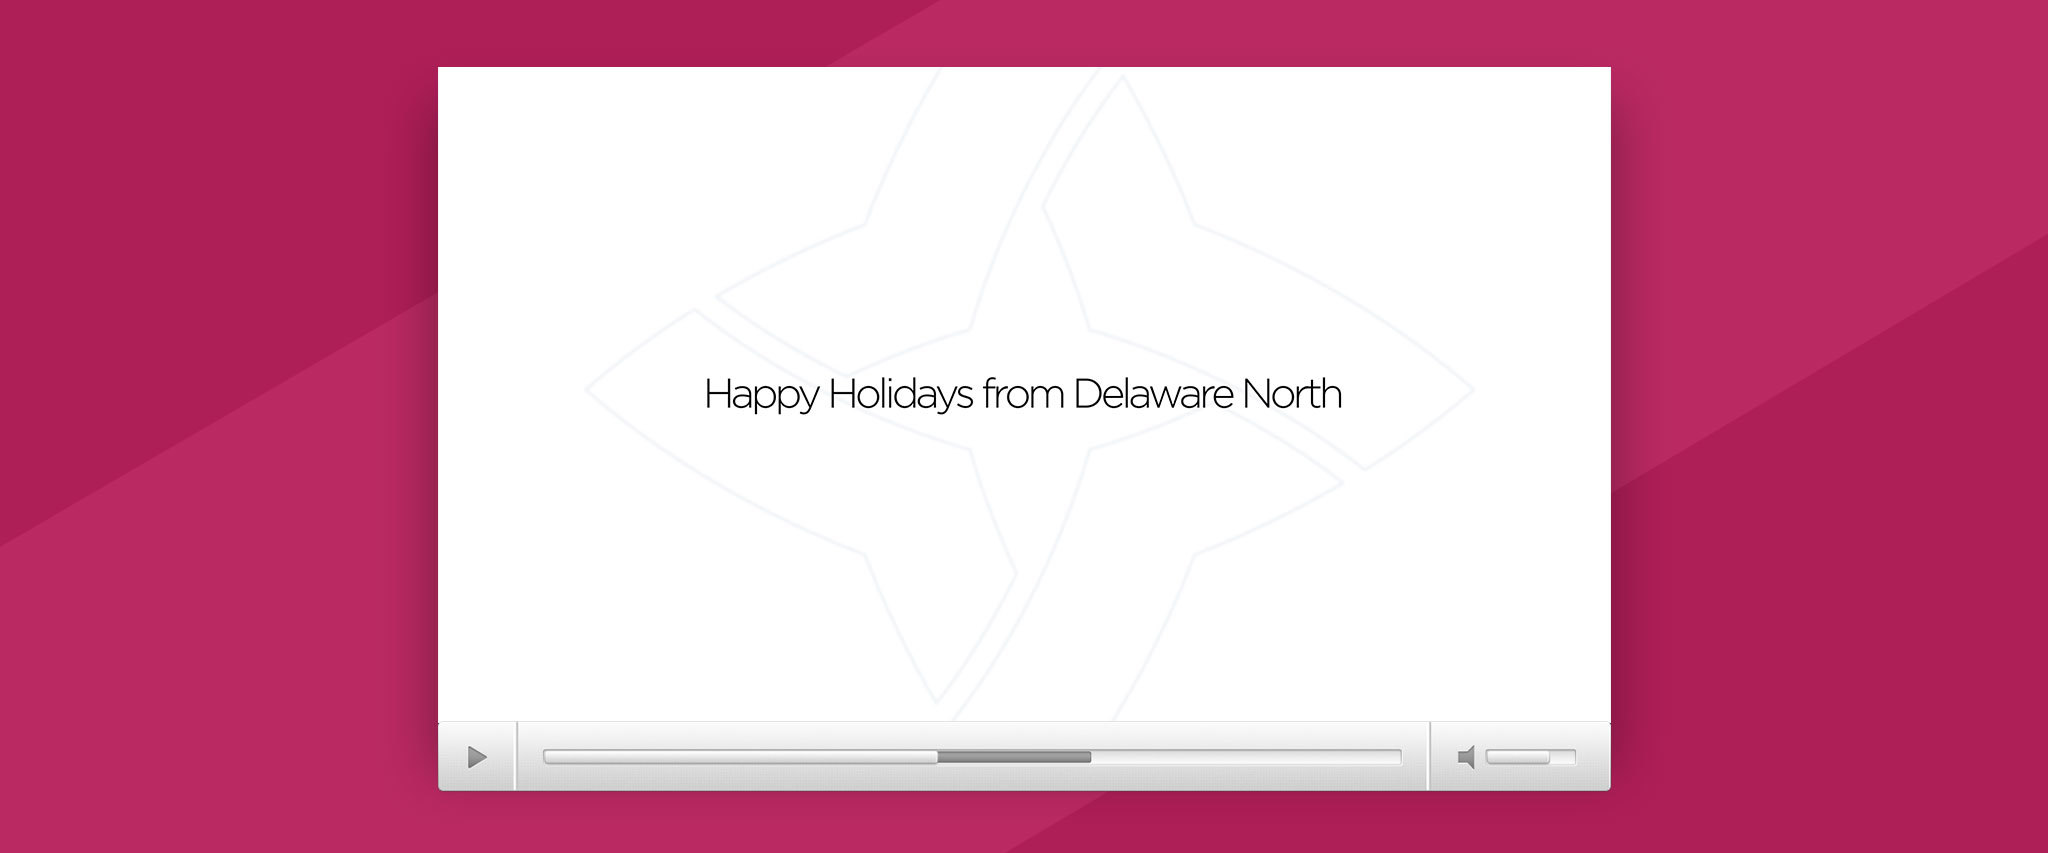 Delaware North: 2016 Holiday Card & Video Gallery